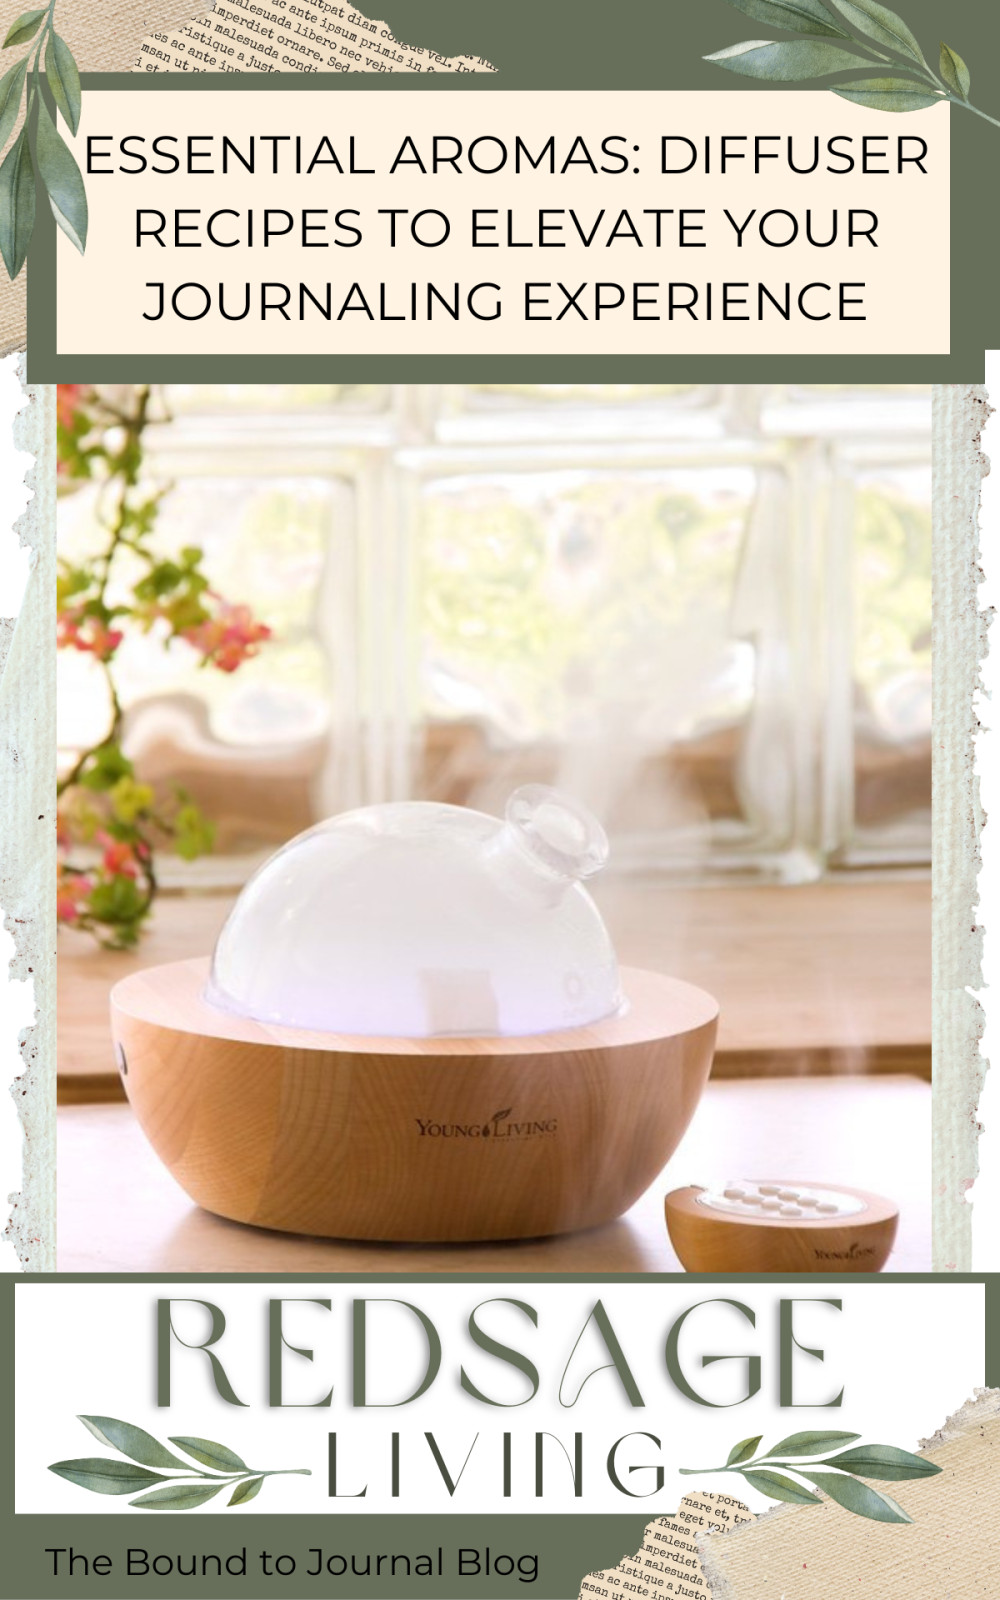 Essential Aromas: Diffuser Recipes to Elevate Your Journaling Experience